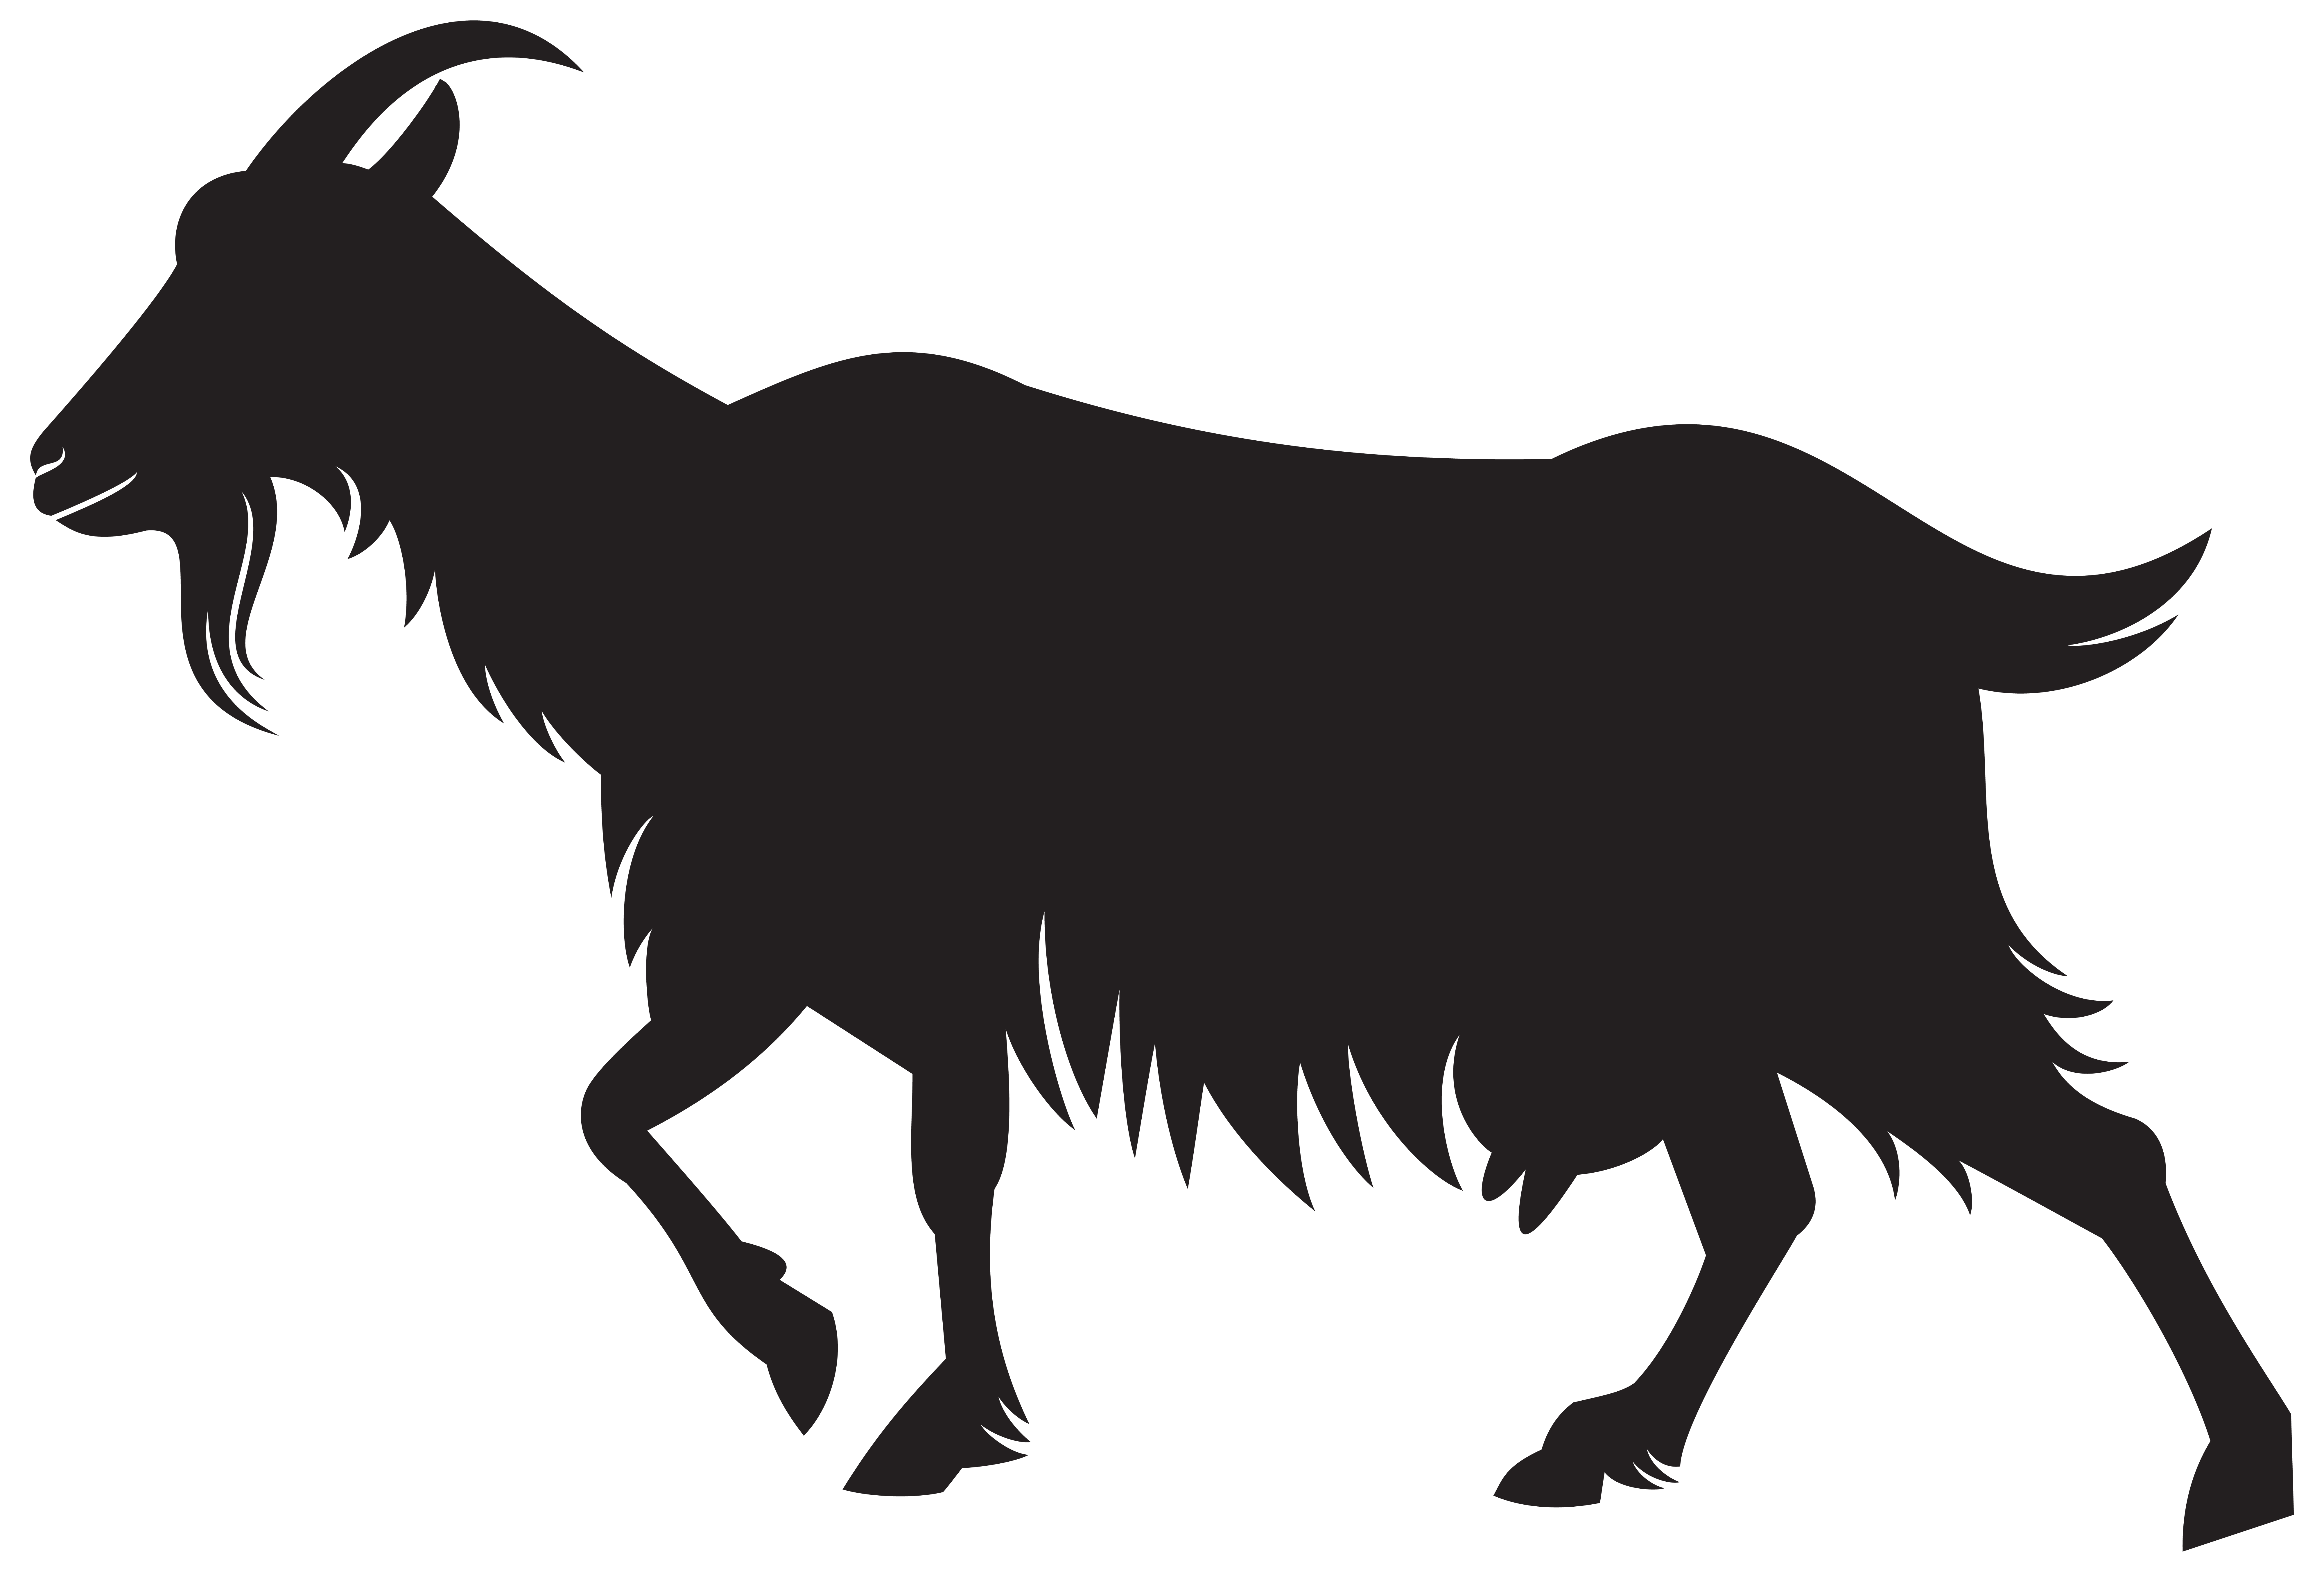 Goat Silhouette PNG Clip Art Image.